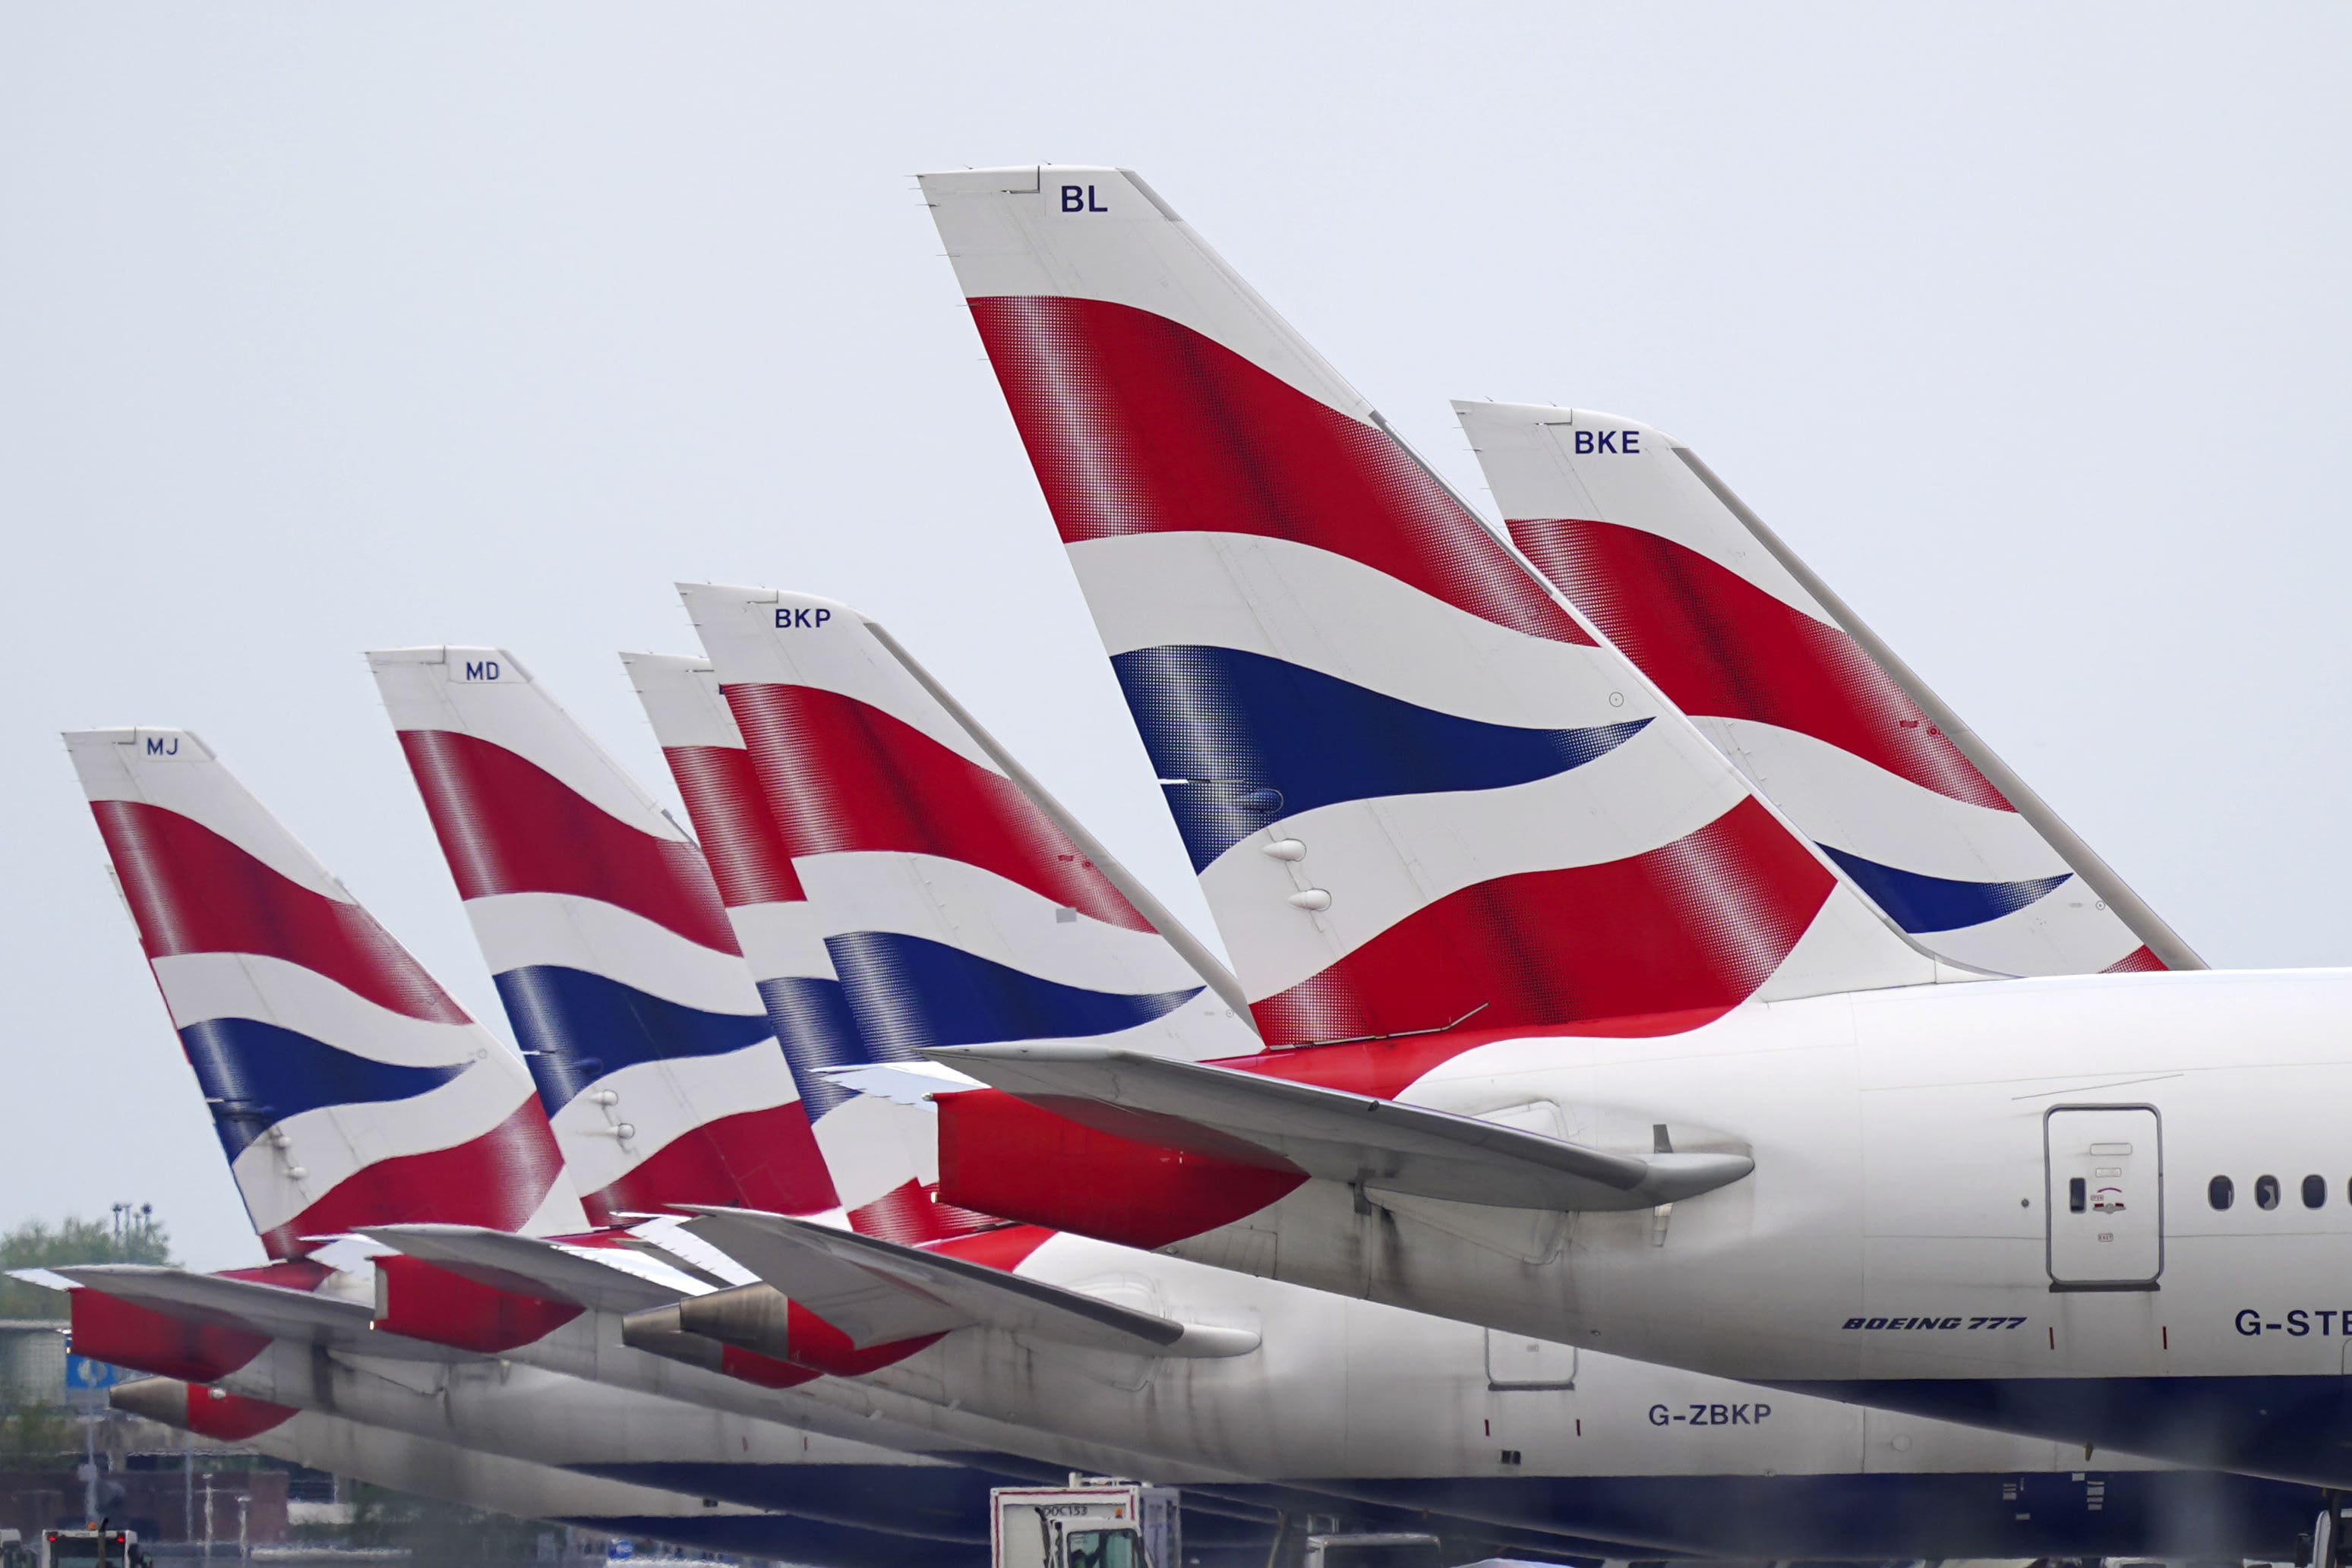 The owner of British Airways and Iberia has seen its revenues recover to pre-pandemic levels and revealed it returned to profit in the third quarter